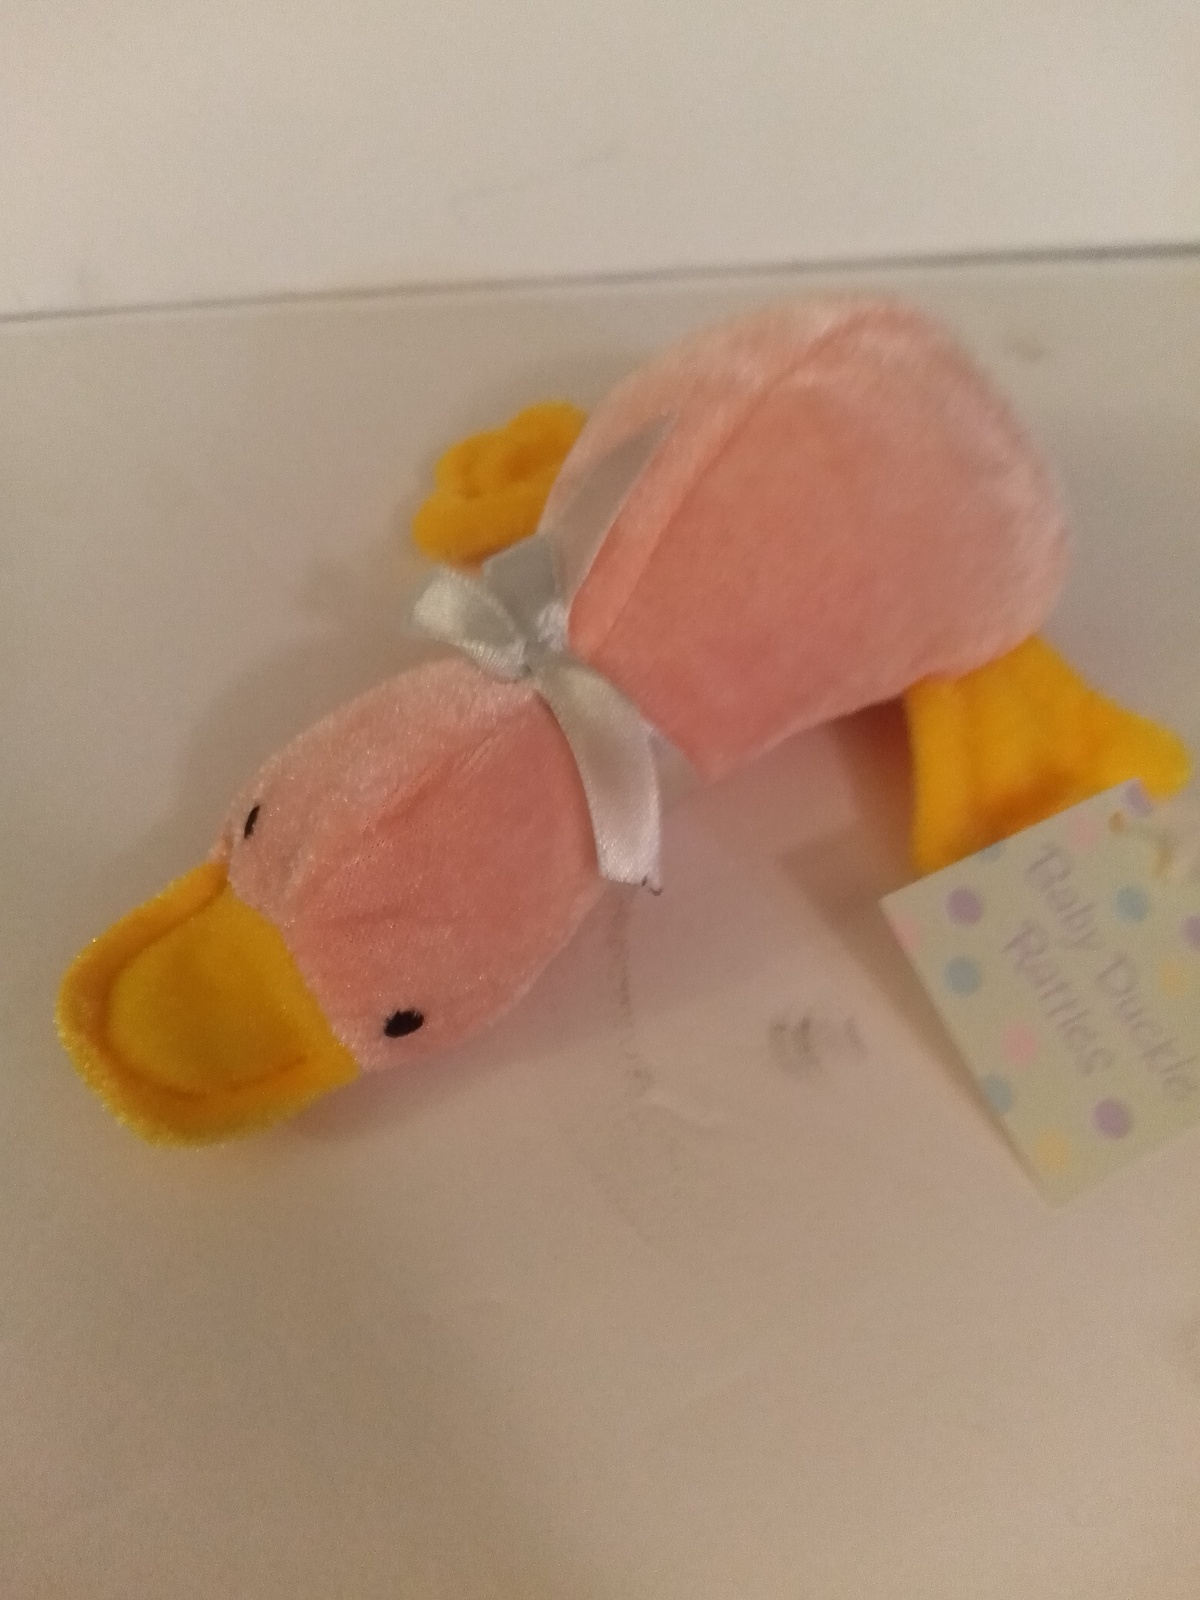 Burton + Burton Pink Baby Duckie Rattle Plush Toy Apprix 6" Long Mint With Tags - $11.99